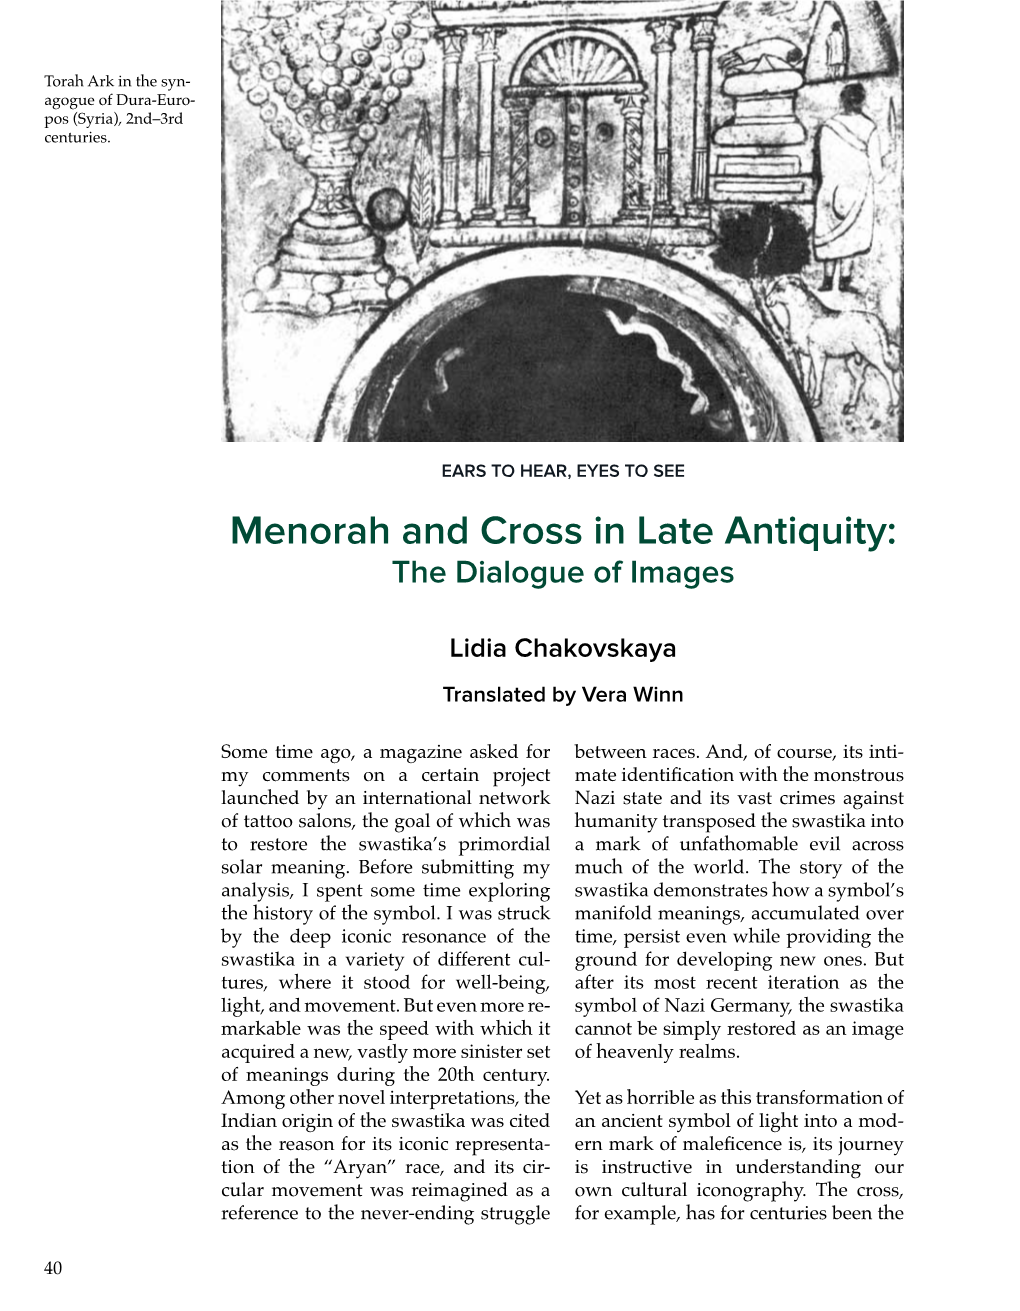 Menorah and Cross in Late Antiquity: the Dialogue of Images